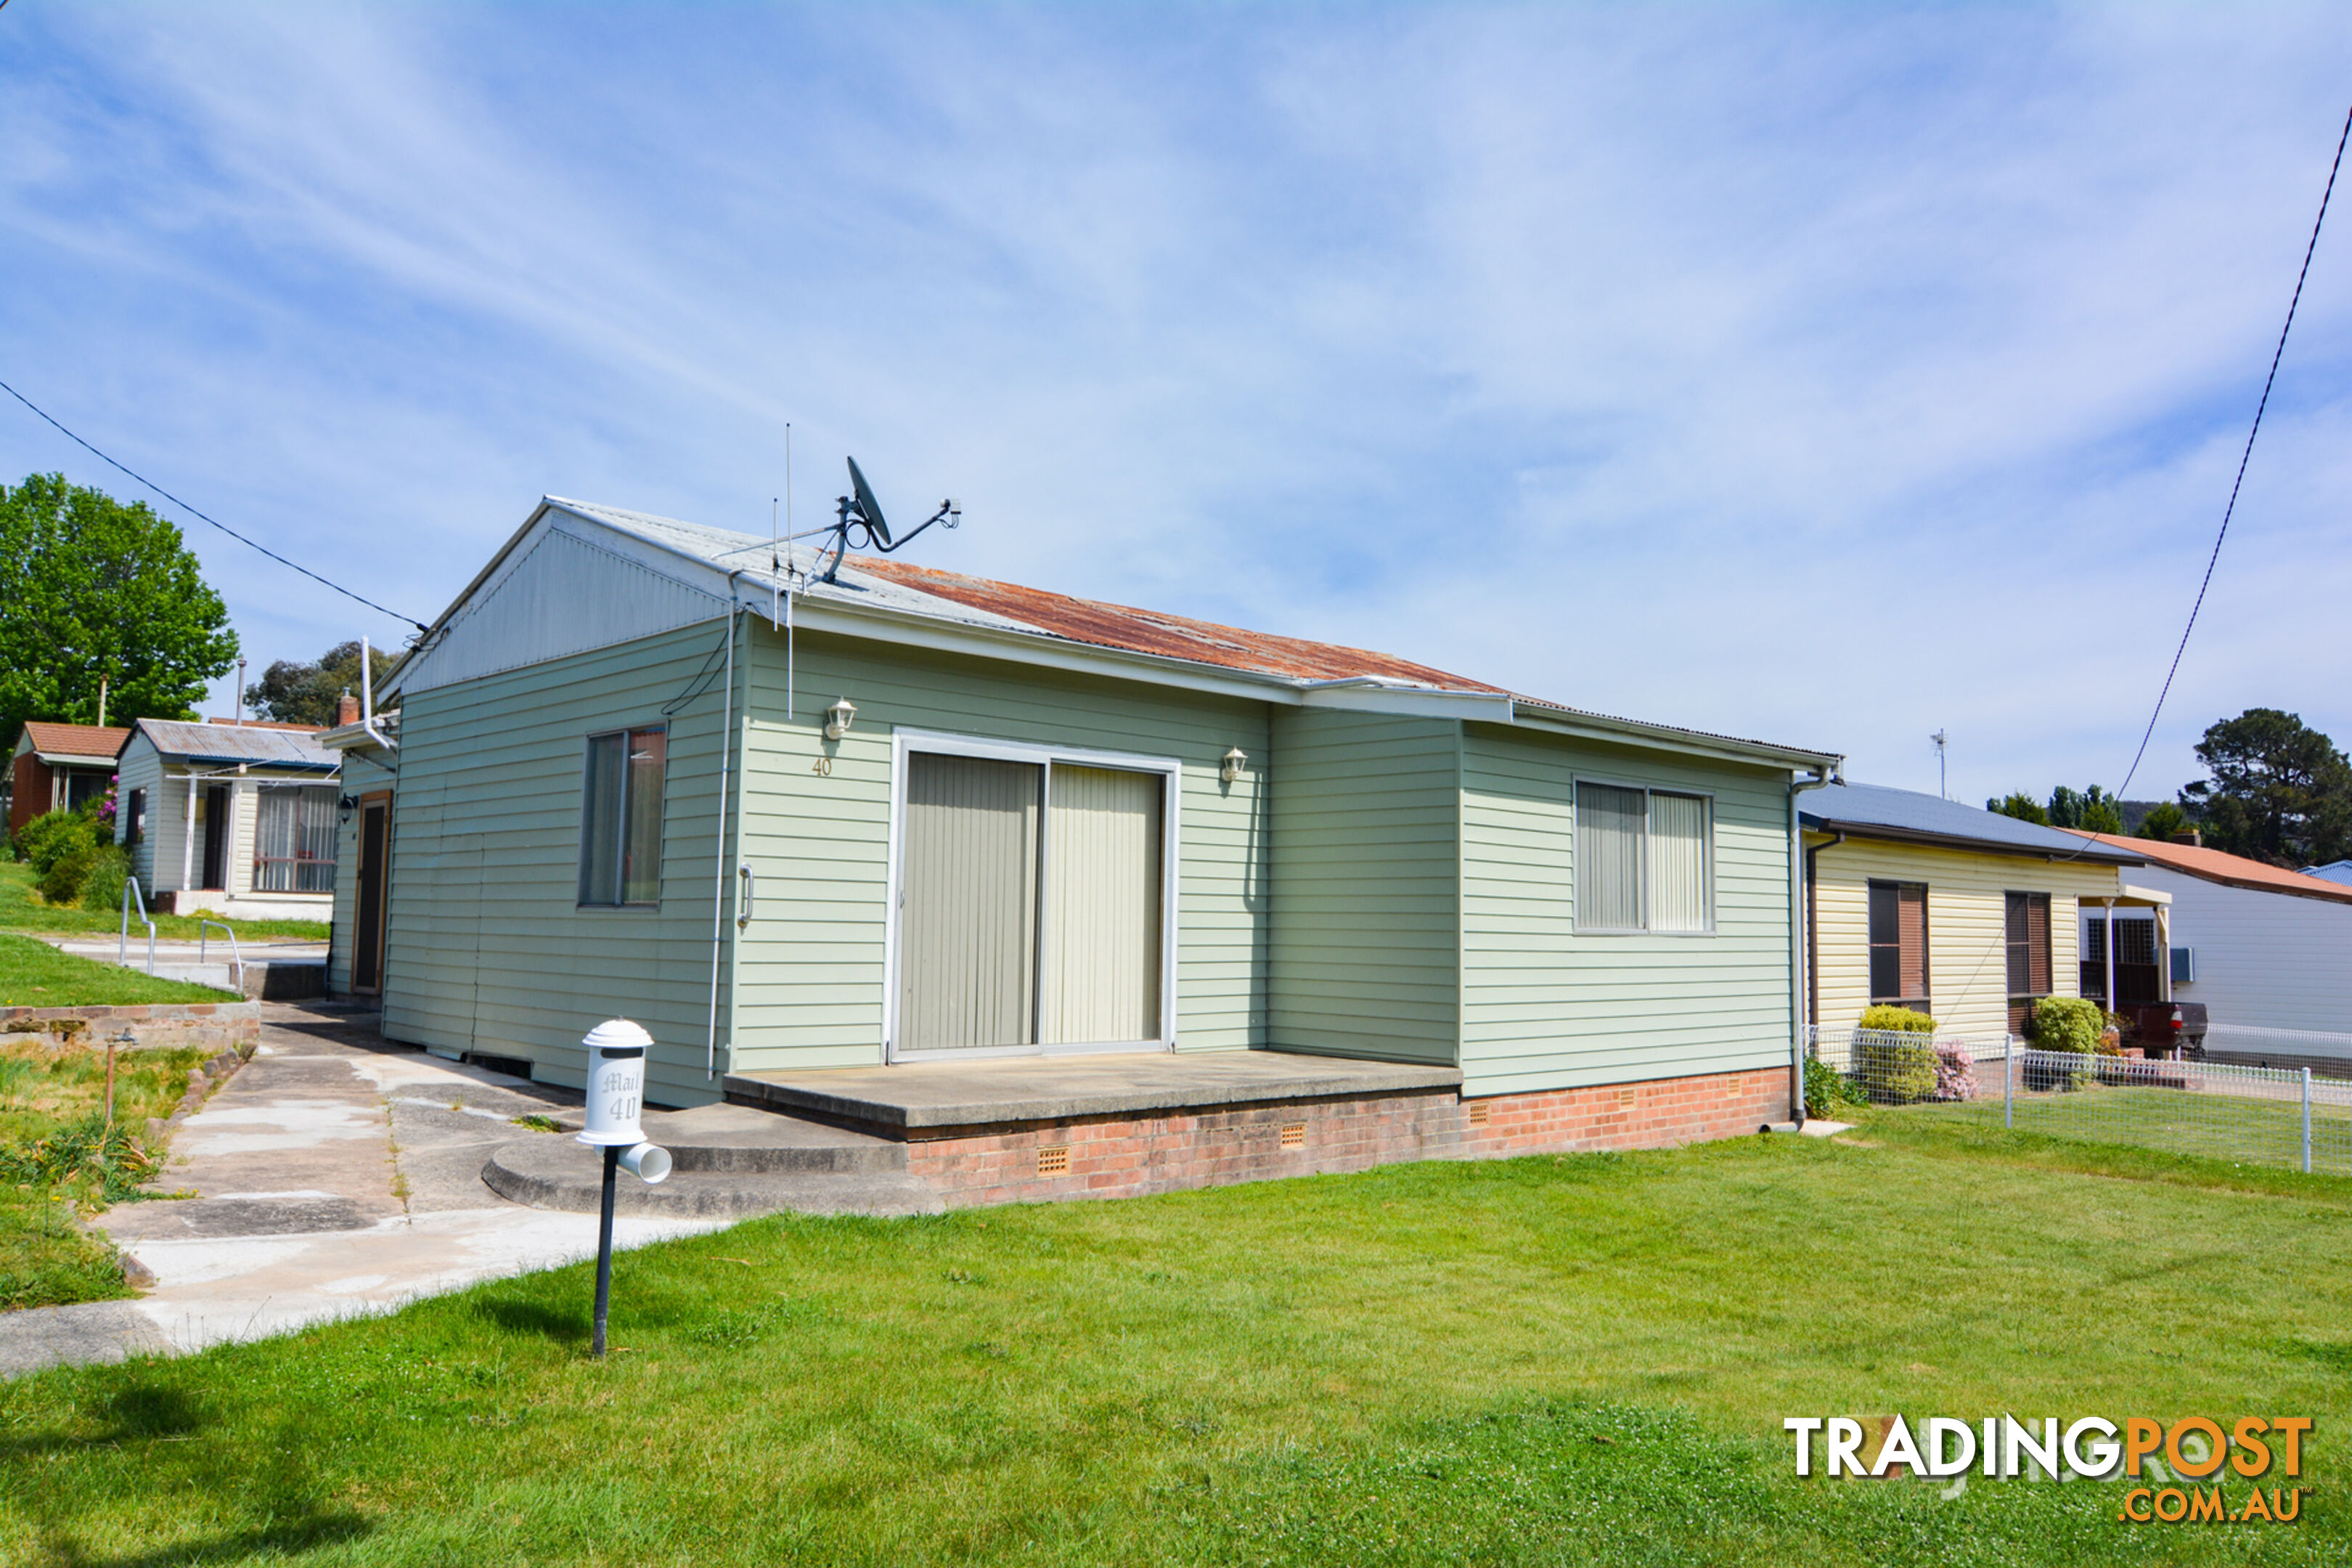 40 Tweed Road LITHGOW NSW 2790